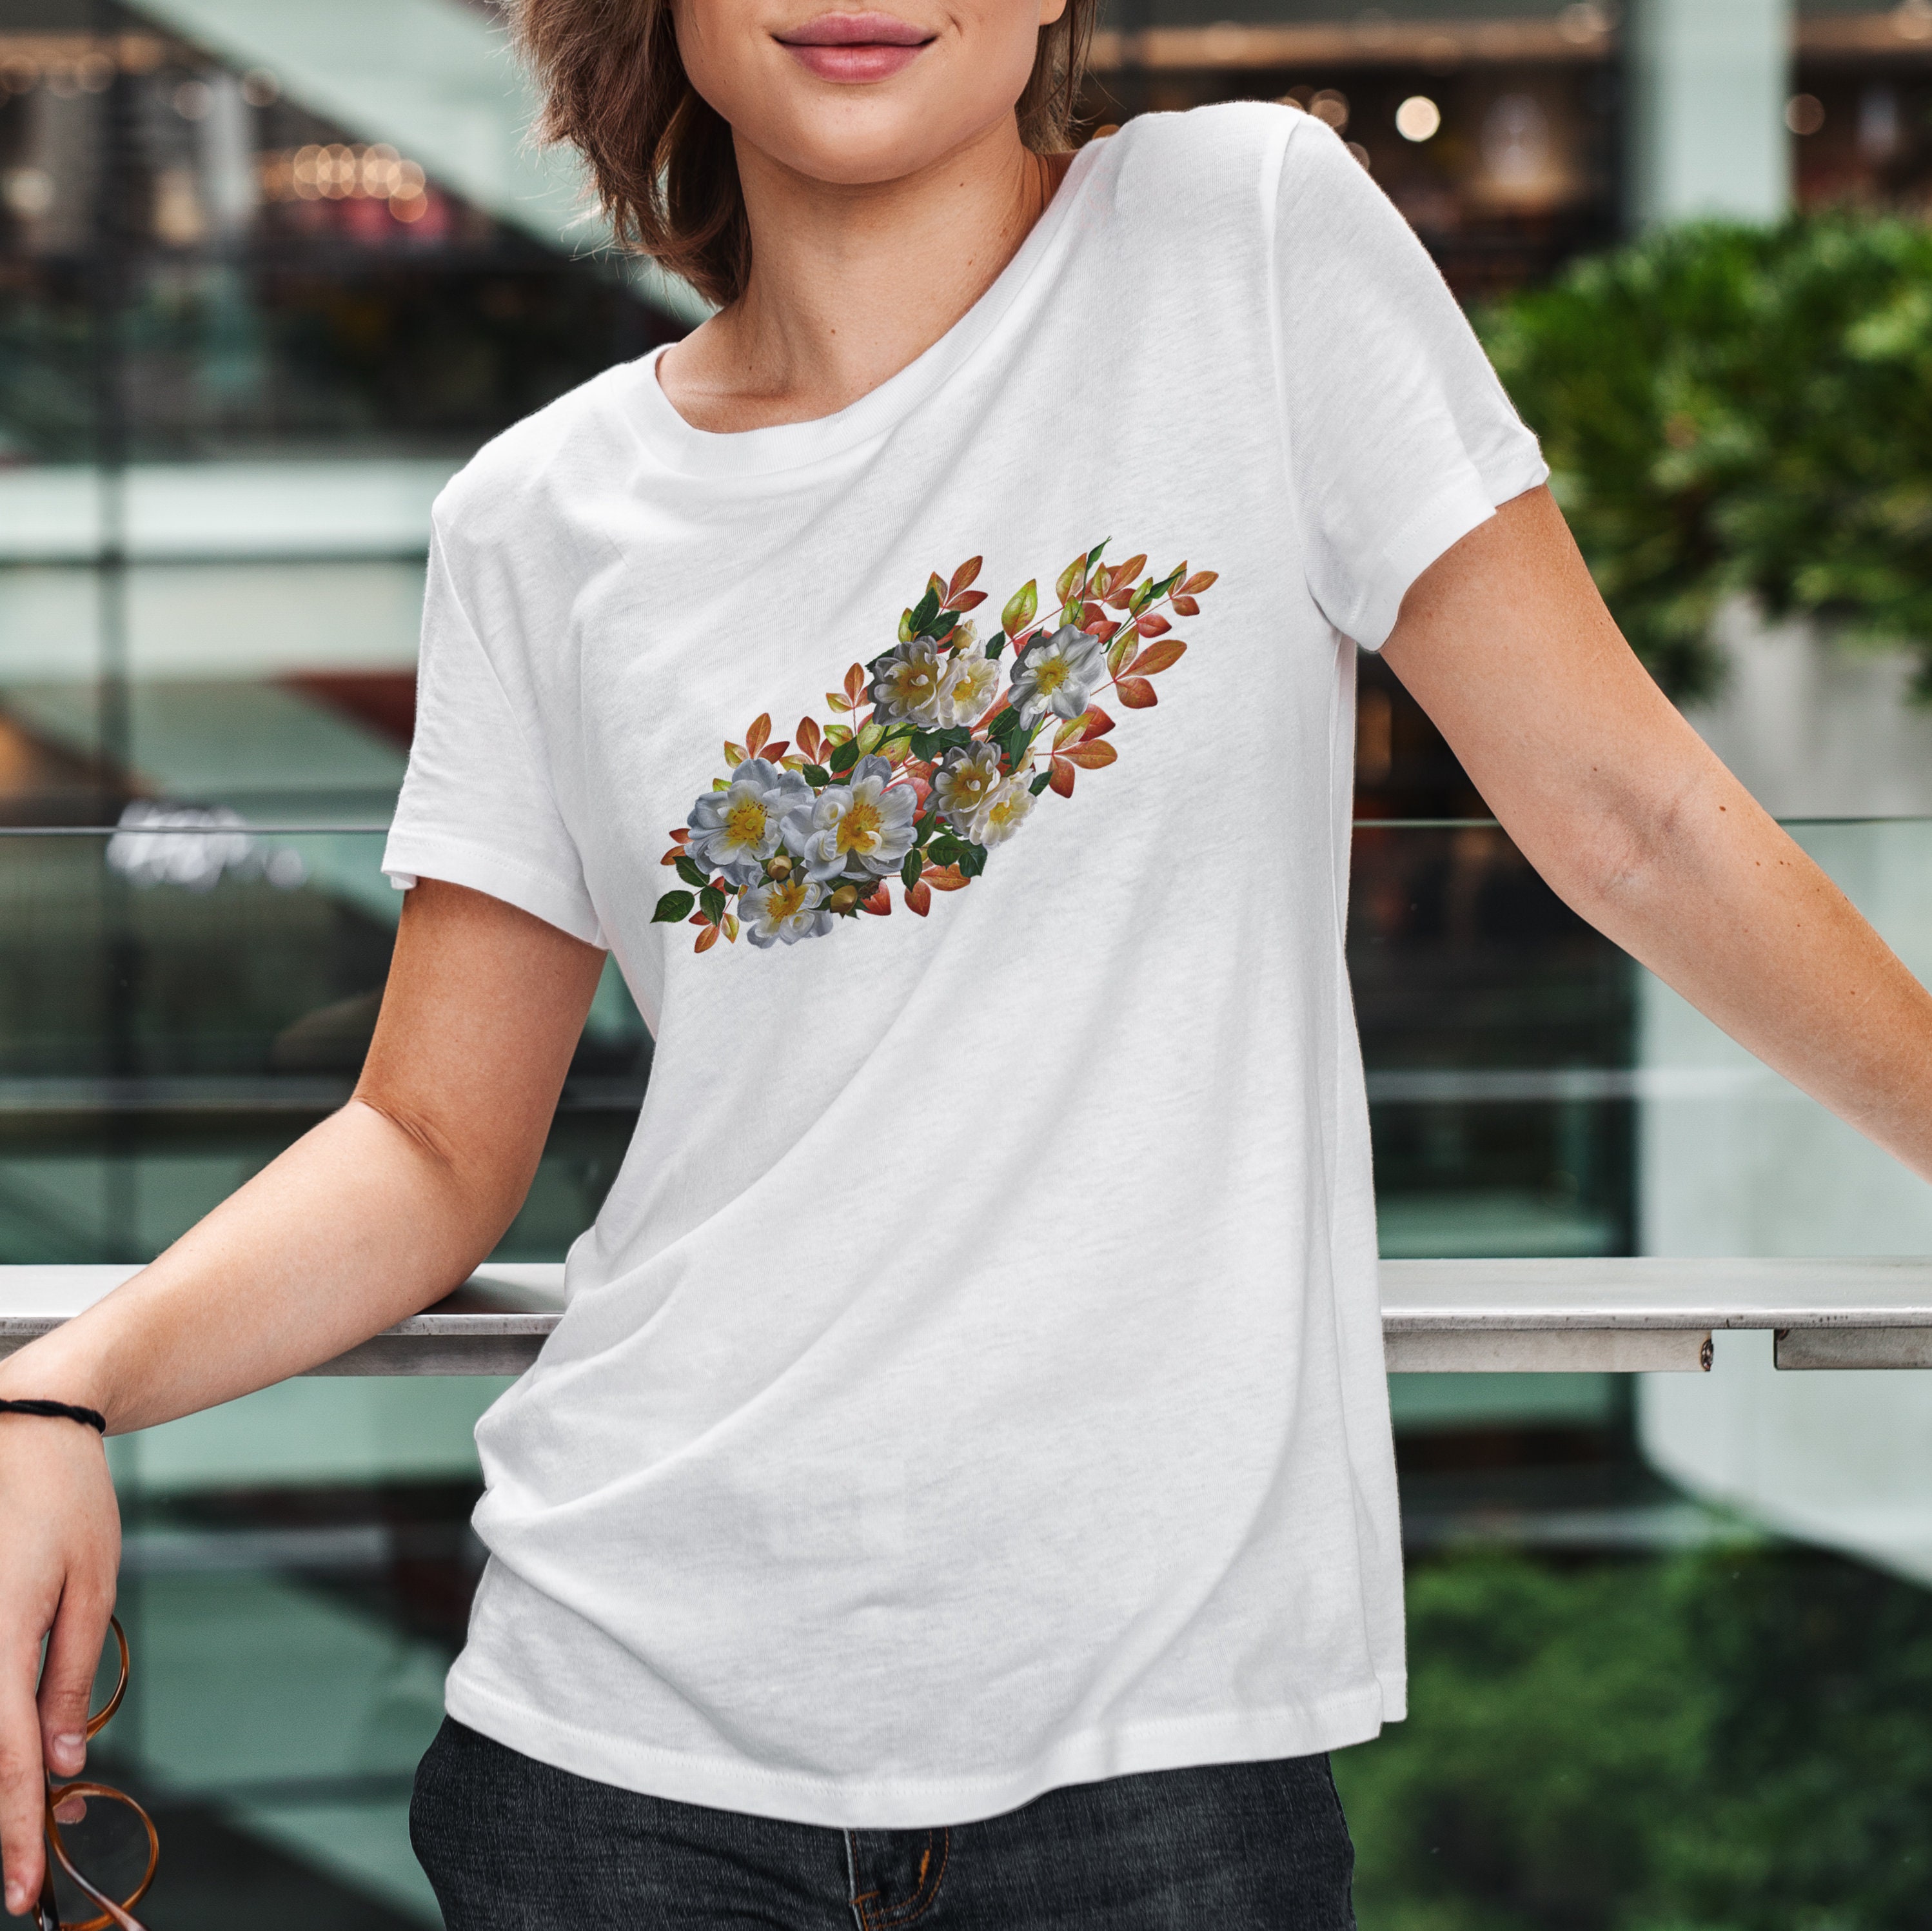 Botanical Graphic Shirt Painted Floral Shirt Women's Spring Flower ...